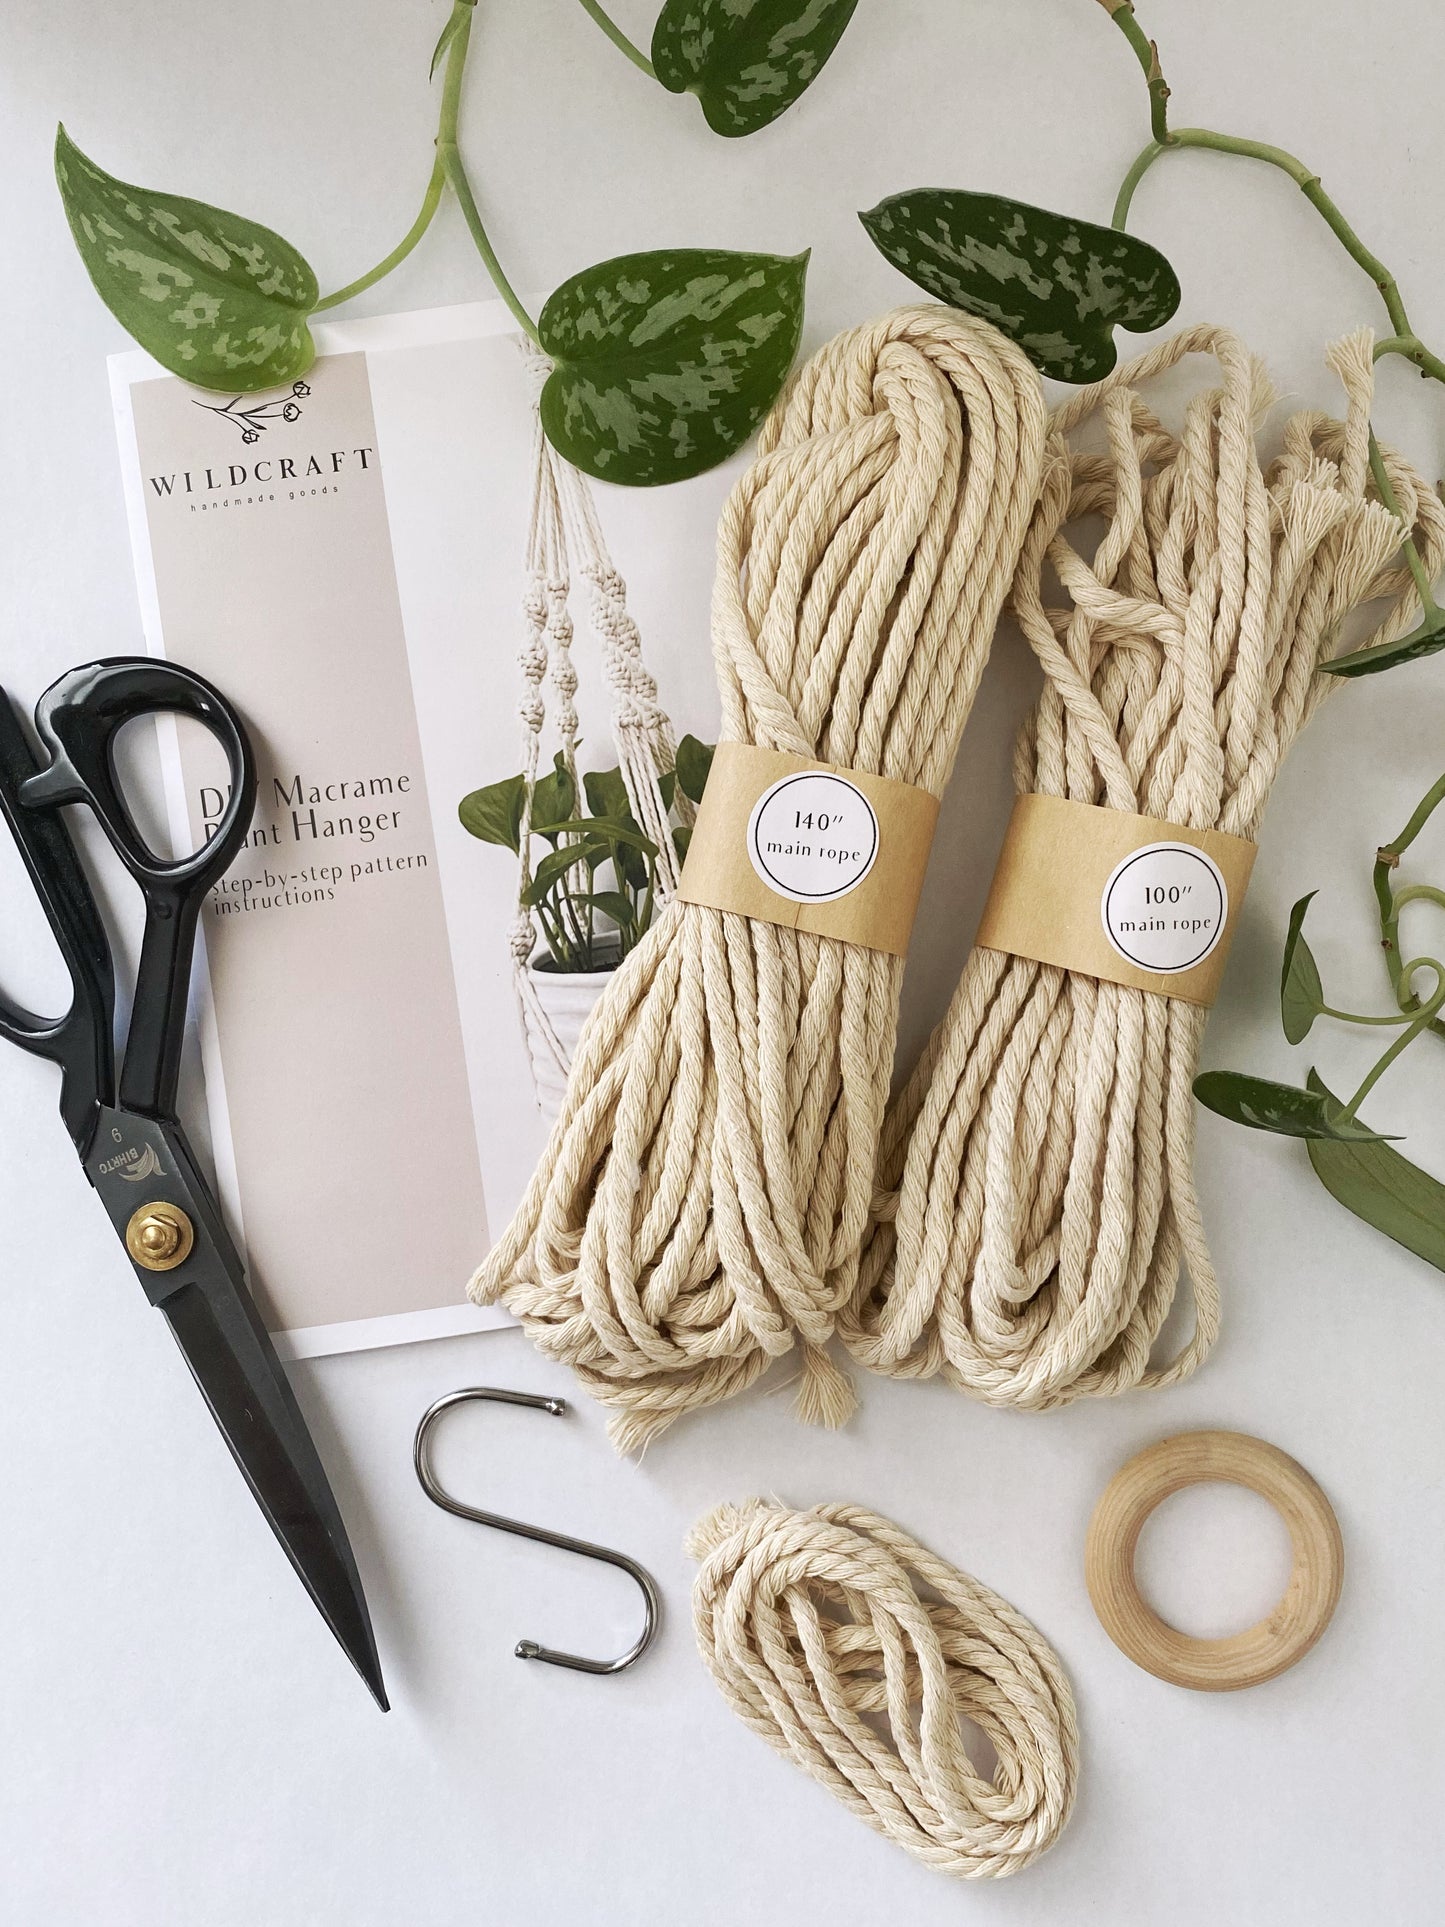 DIY Macrame Kit for Adults Beginners, 4 Macrame Plant Hanger Kit + Froocy  Macrame Starter Kit Includes: 100% Cotton Macrame Cord 3 mm + 4 Wooden  Rings